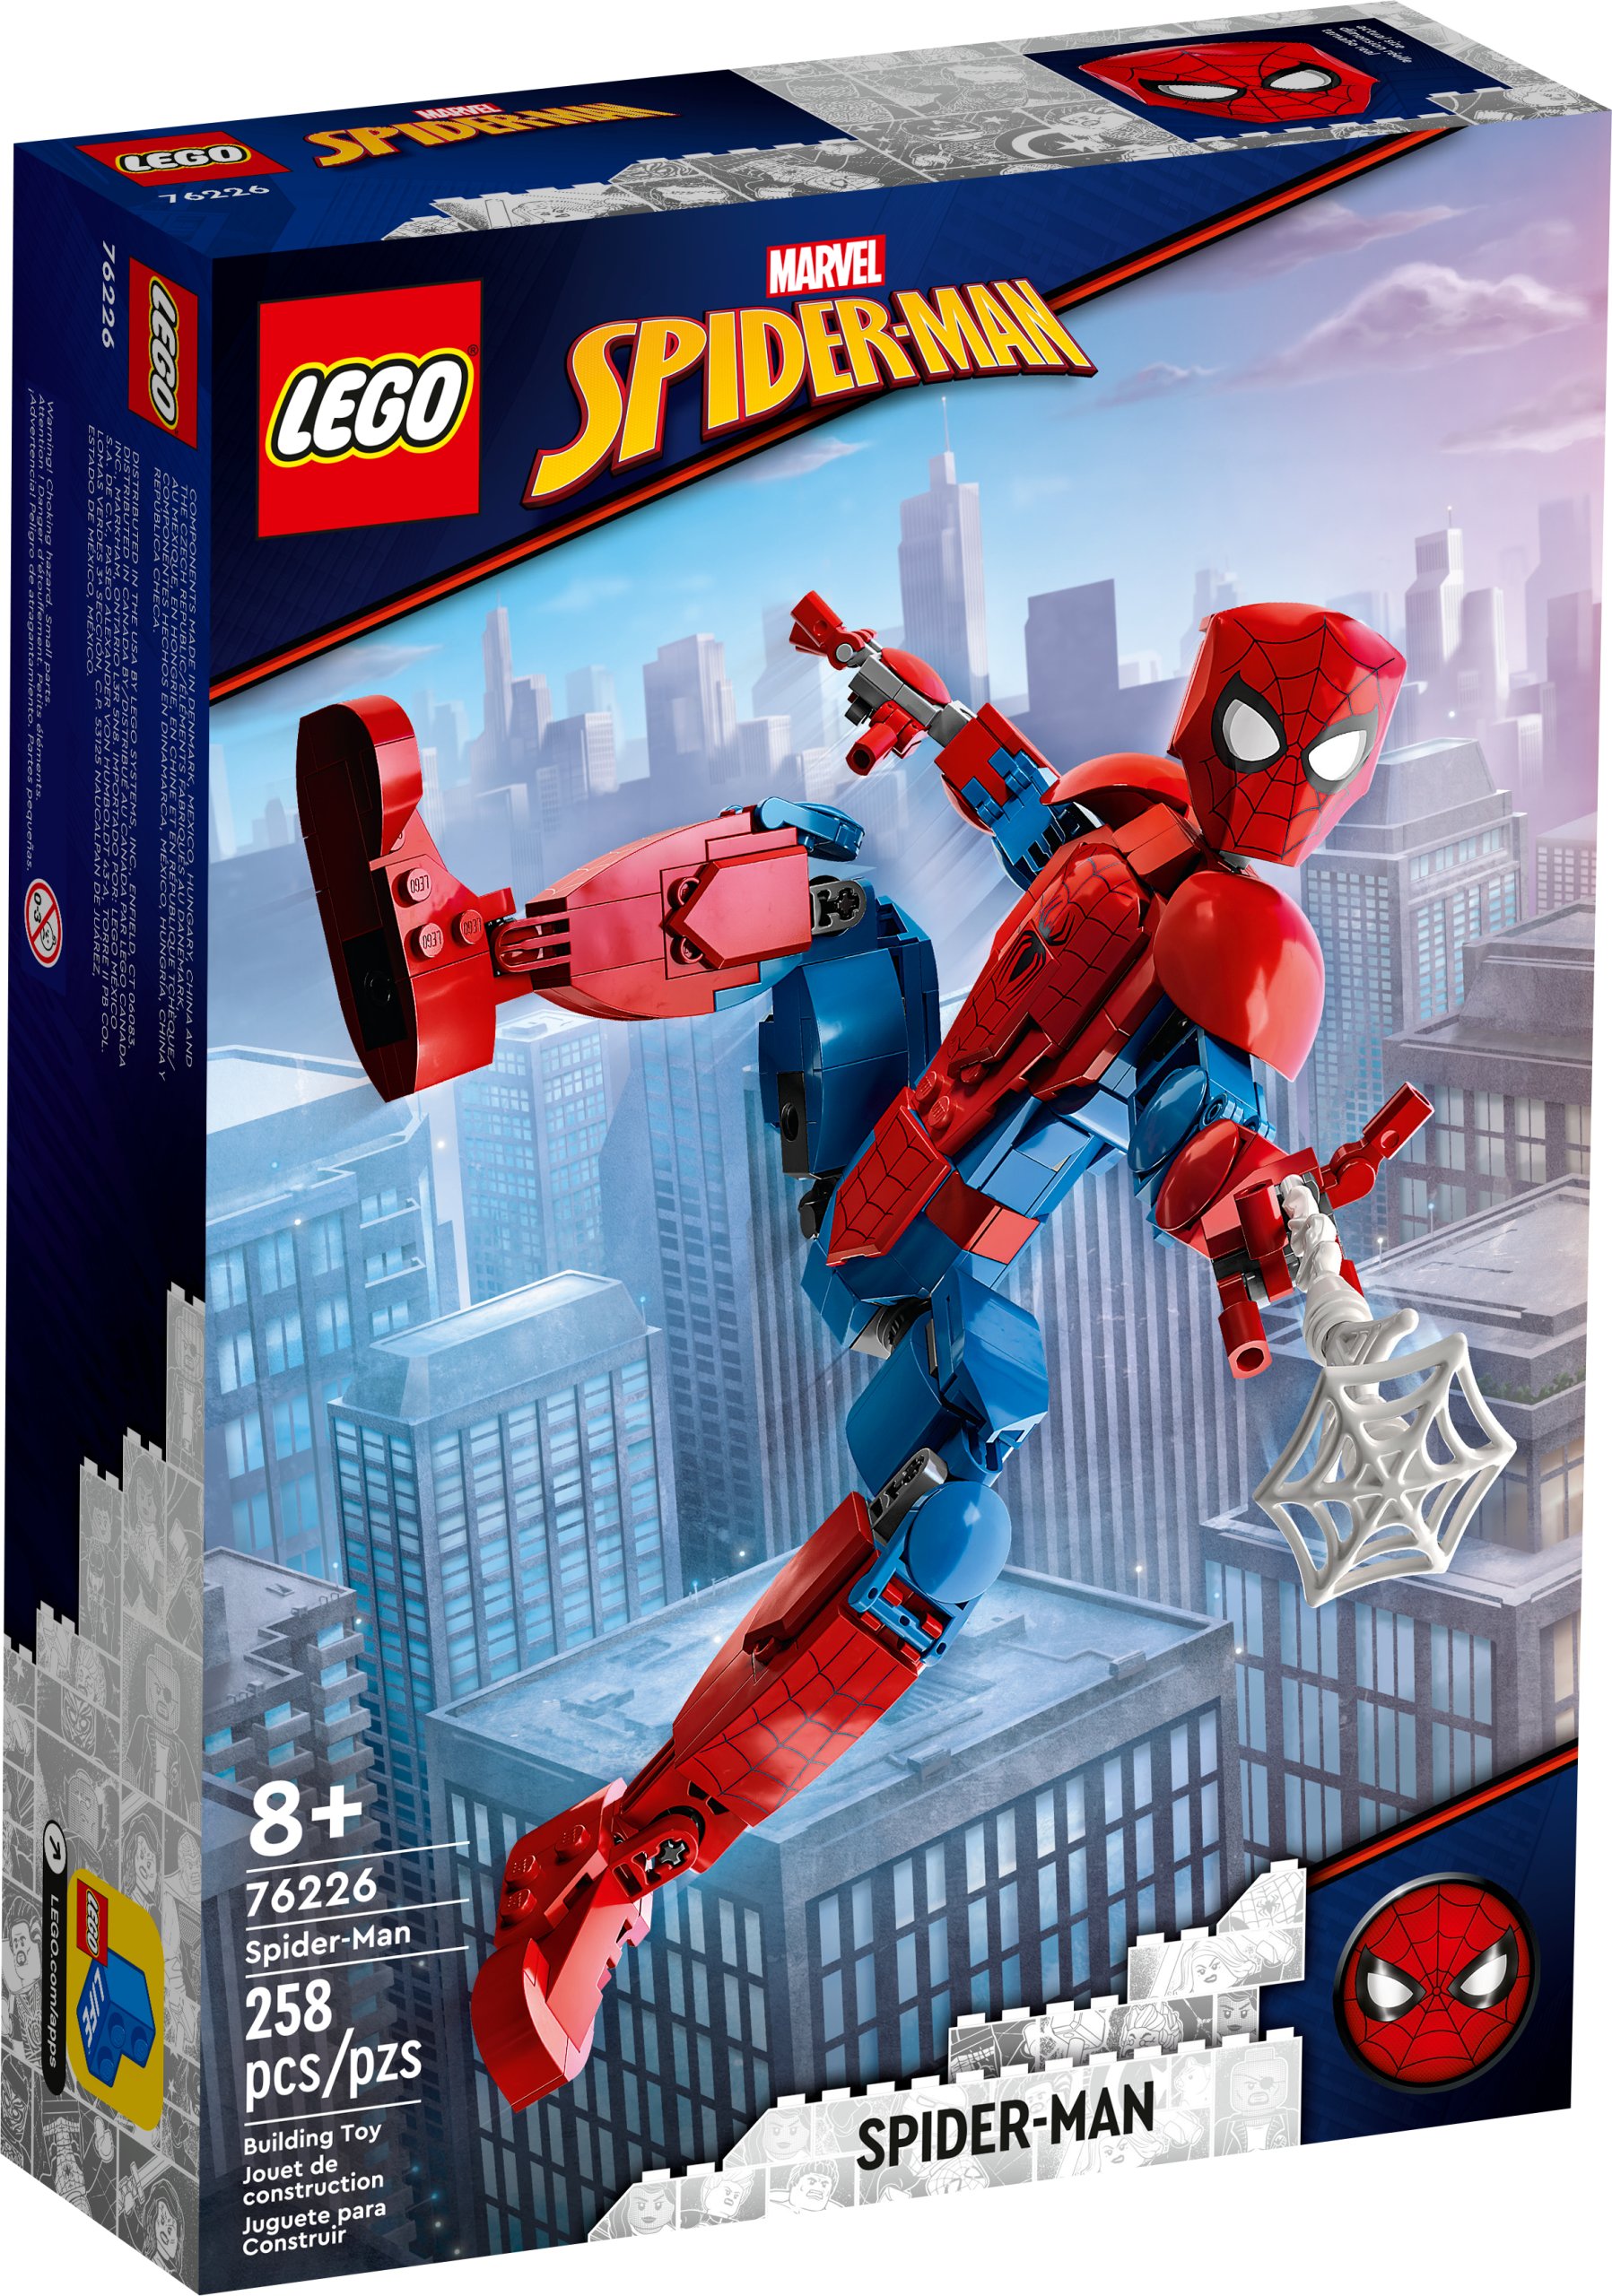 Put Spider-Man action into the hands of fans aged 8 and up with the LEGO® Marvel Spider-Man Figure (76226). Standing over 9.5 in. (24 cm) tall, this buildable take-anywhere toy brings Marvel-movie authenticity to kids’ Super Hero adventures. A Spidey of their own! Based on Spider-Man from the Marvel Universe, this fully jointed figure is just like the real thing. Using the web accessories included, kids can move and position their Spider-Man as they battle their way through endless exciting missions. When the day’s web-slinging action is over, the flexible figure looks great on display. The free LEGO Building Instructions app lets kids view, zoom and rotate the model as they build, giving them an amazing sense of immersion and interaction during the construction process. A hands-on Spider-Man – Put the web-slinging Super Hero into the hands of Spider-Man fans aged 8 and up with this LEGO® Marvel Spider-Man Figure (76226) set Iconic Marvel hero – Kids assemble the 258-piece figure into a realistic recreation of Spider-Man from the Marvel Universe Fully jointed – All parts of the buildable Spider-Man are articulated, so kids can move, position and pose the figure just like the real thing Gift for kids – Give this hands-on play figure to a young Super Hero aged 8 and up as a birthday, holiday or just-because treat Portable play – This go-anywhere figure stands 9.5 in. (24 cm) tall, just the right size to provide instant action wherever kids take it Immersive building experience – The LEGO® Building Instructions app lets users view, zoom and rotate the model as they build Expand the Super Hero fun – There are more LEGO® Marvel figures in the series to collect, including Miles Morales (76225) and Venom (76230) figures Quality guaranteed – LEGO® components fulfill stringent industry quality standards to ensure they are consistent, compatible and connect and pull apart easily every time Safety assured – LEGO® components are dropped, heated, crushed, twisted and analyzed to make sure they satisfy rigorous global safety standards